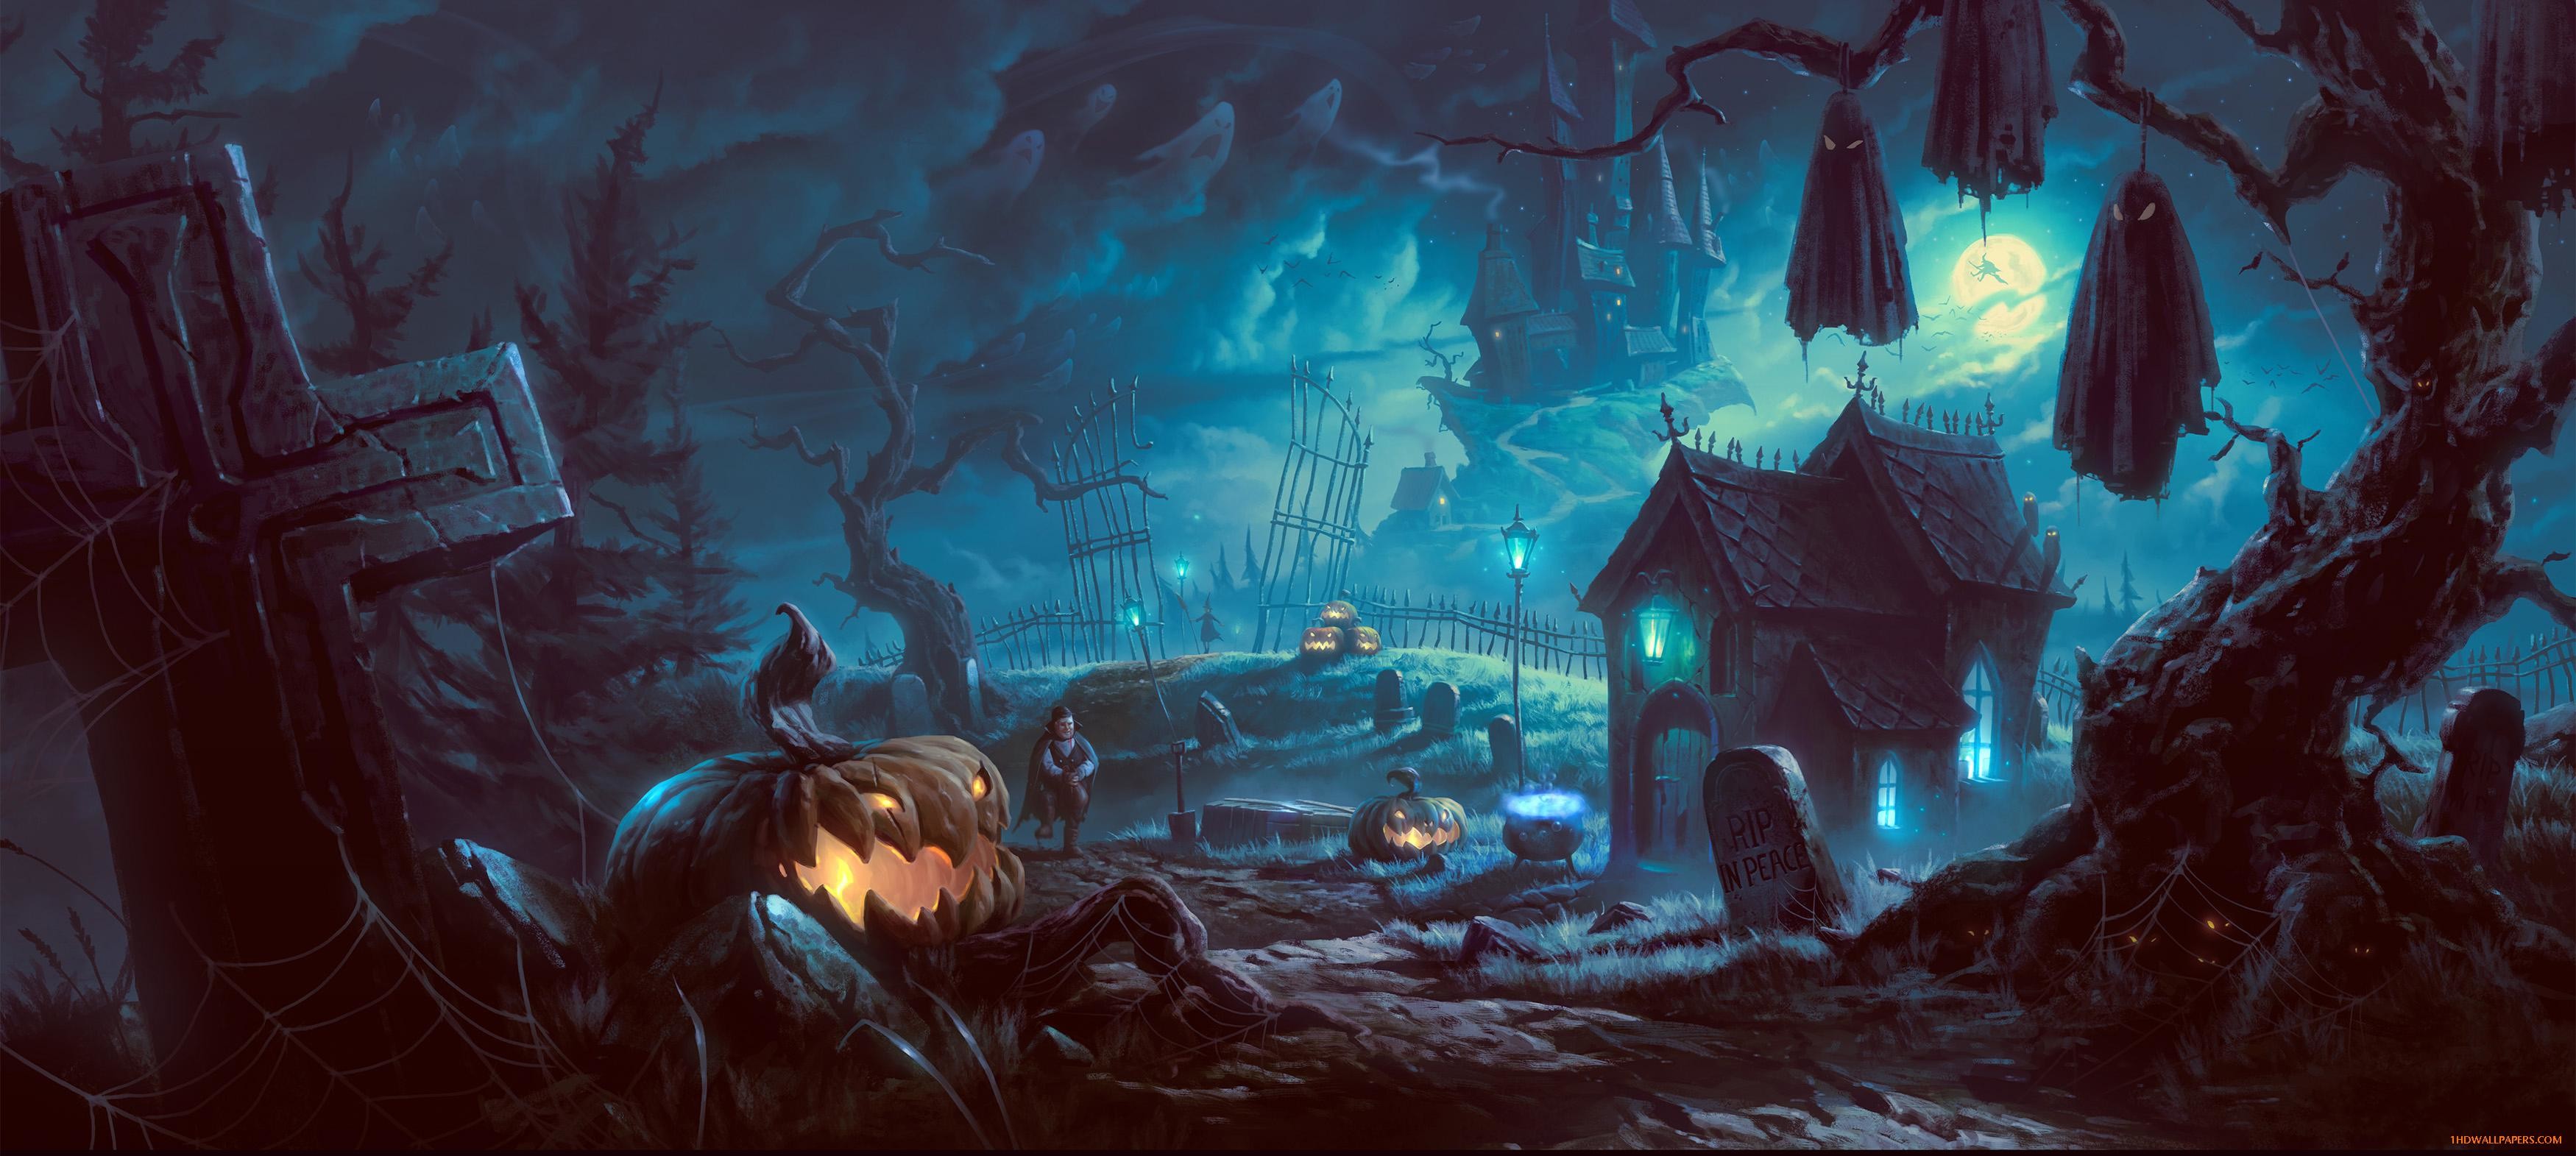 3500x1571 HQ Definition Halloween Wallpapers - HD Wallpapers